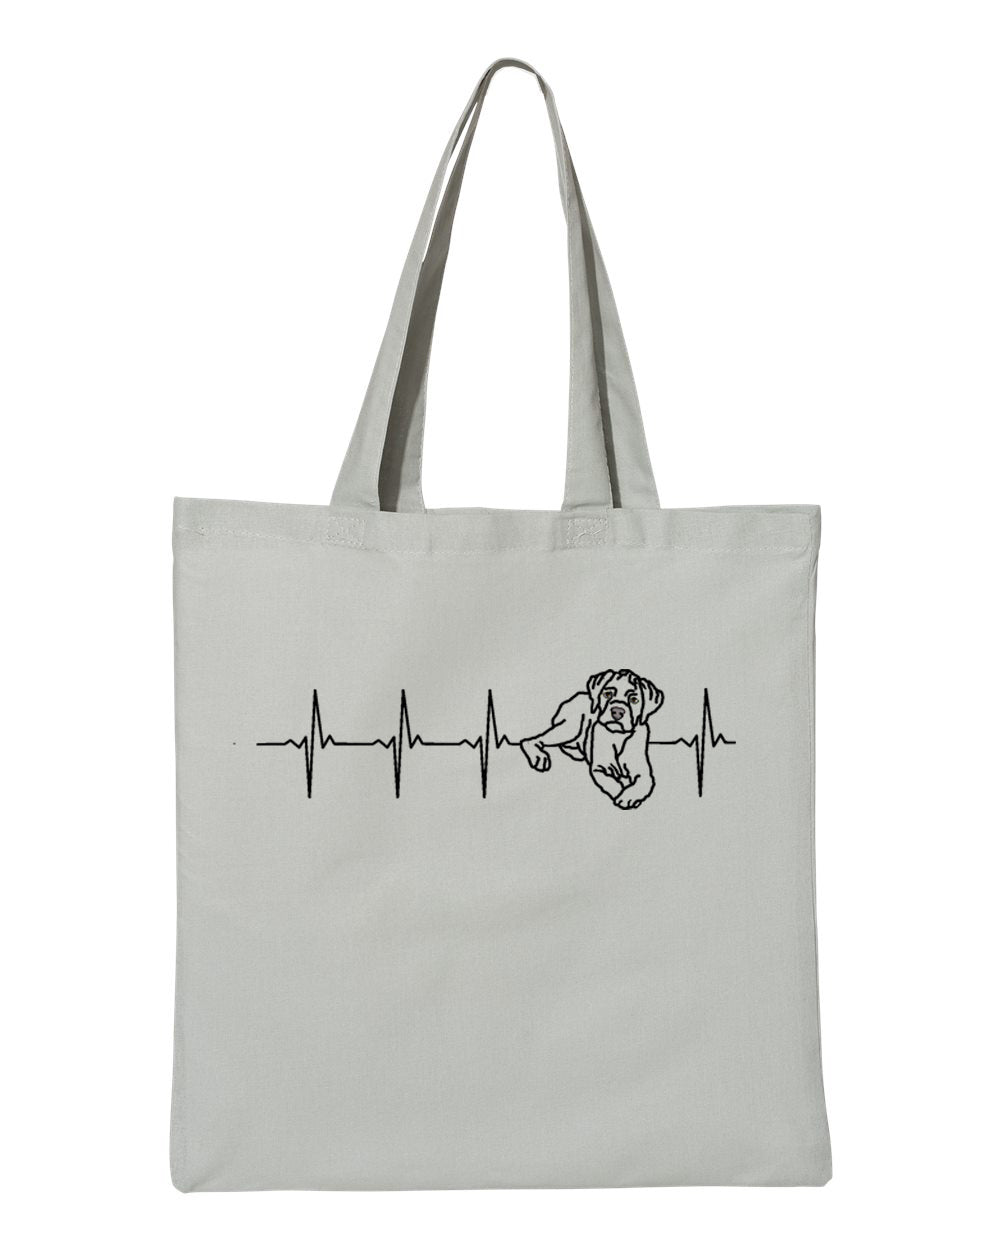 Boxer Heartbeat on Tote